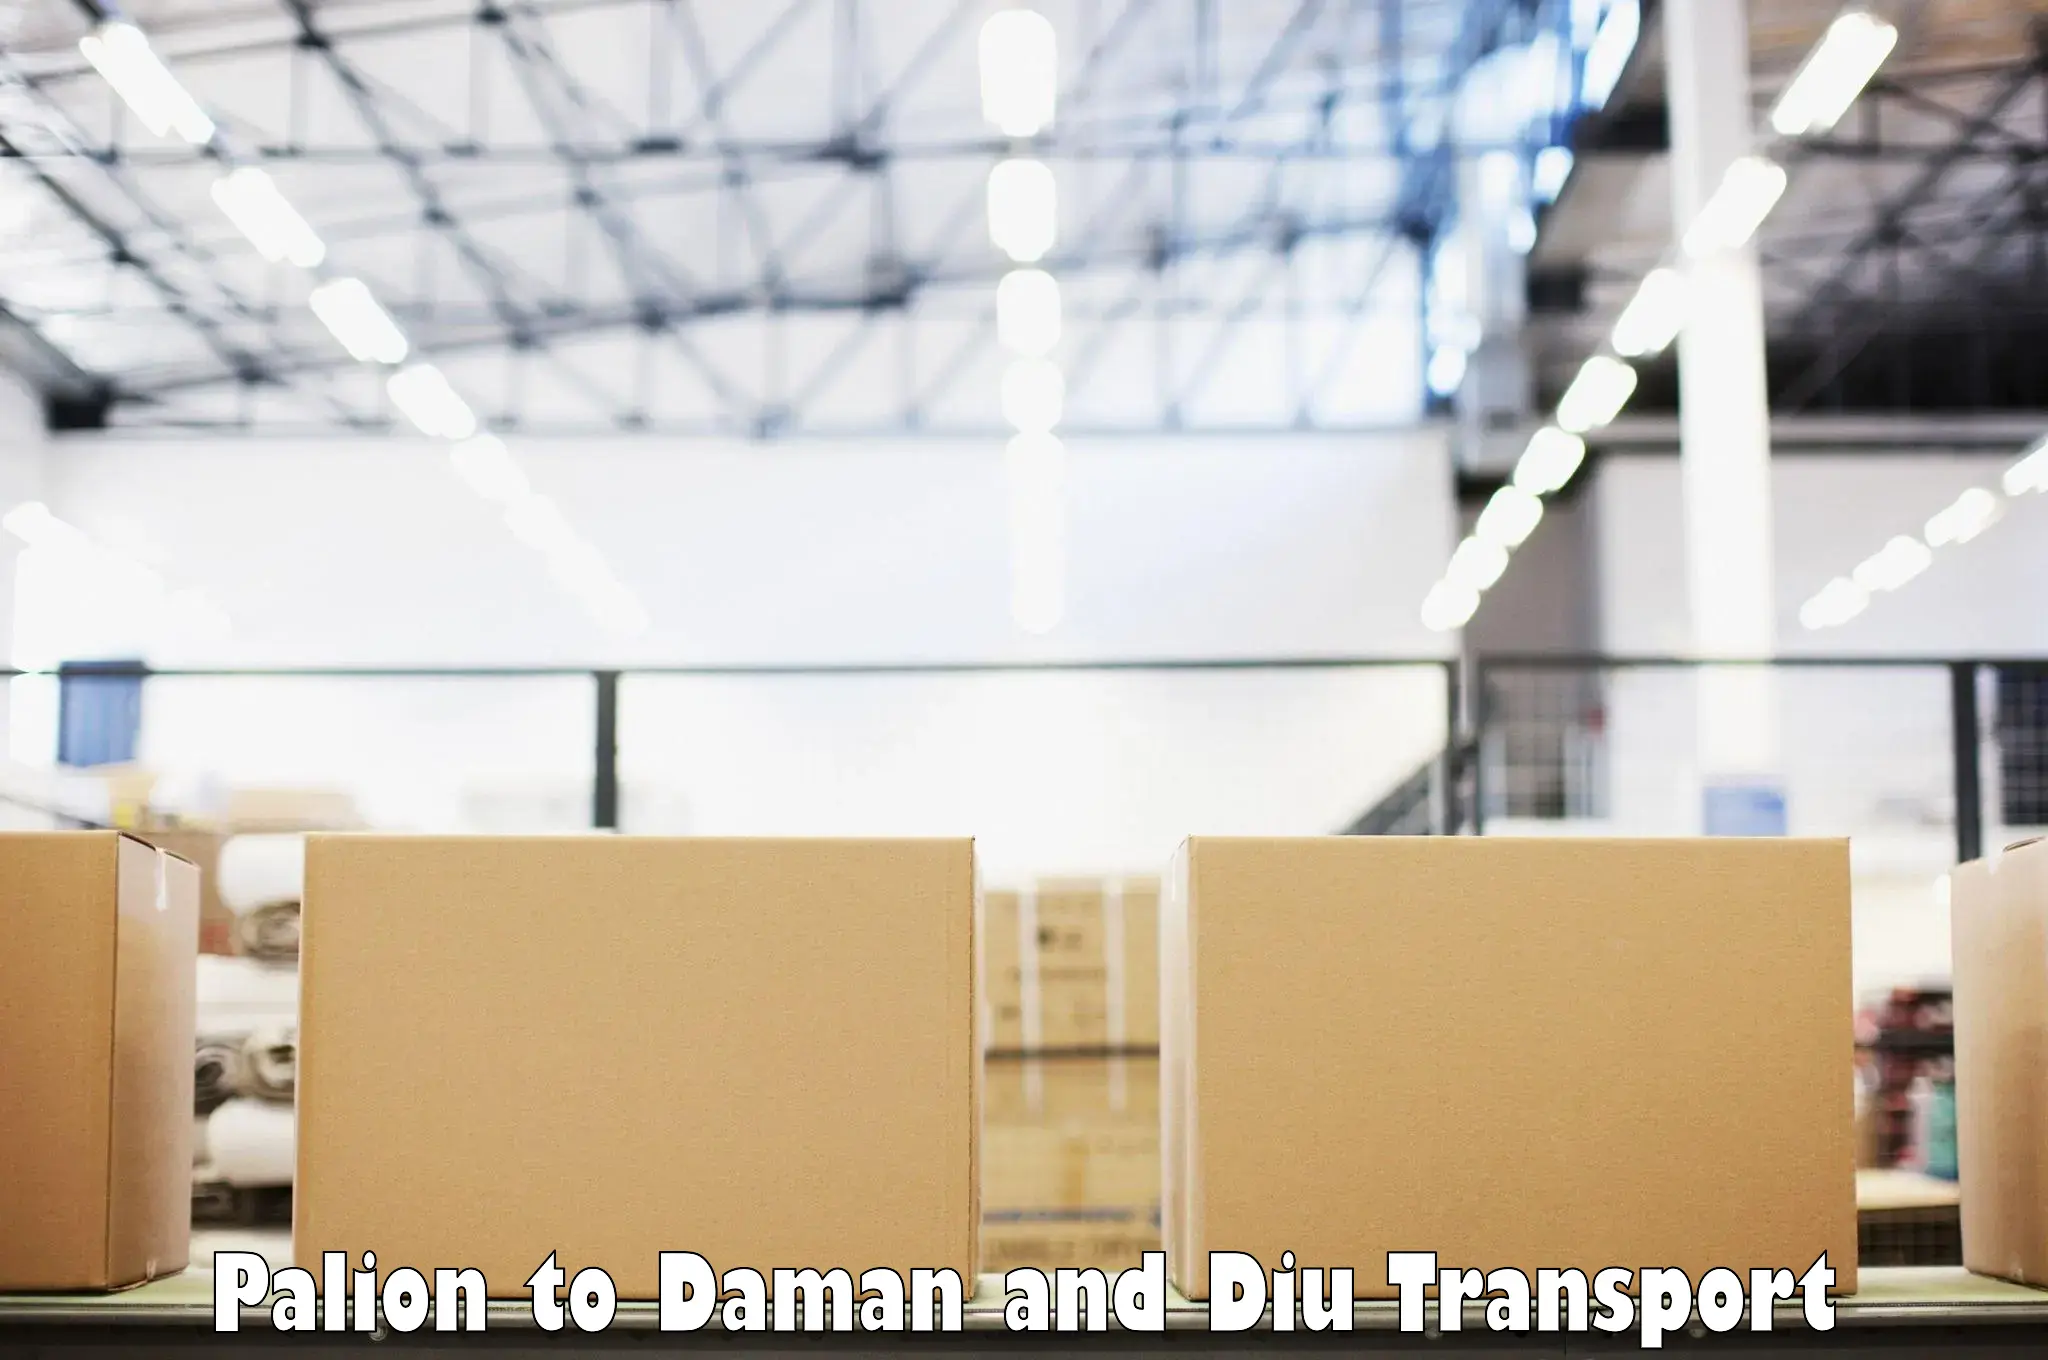 Two wheeler parcel service Palion to Daman and Diu